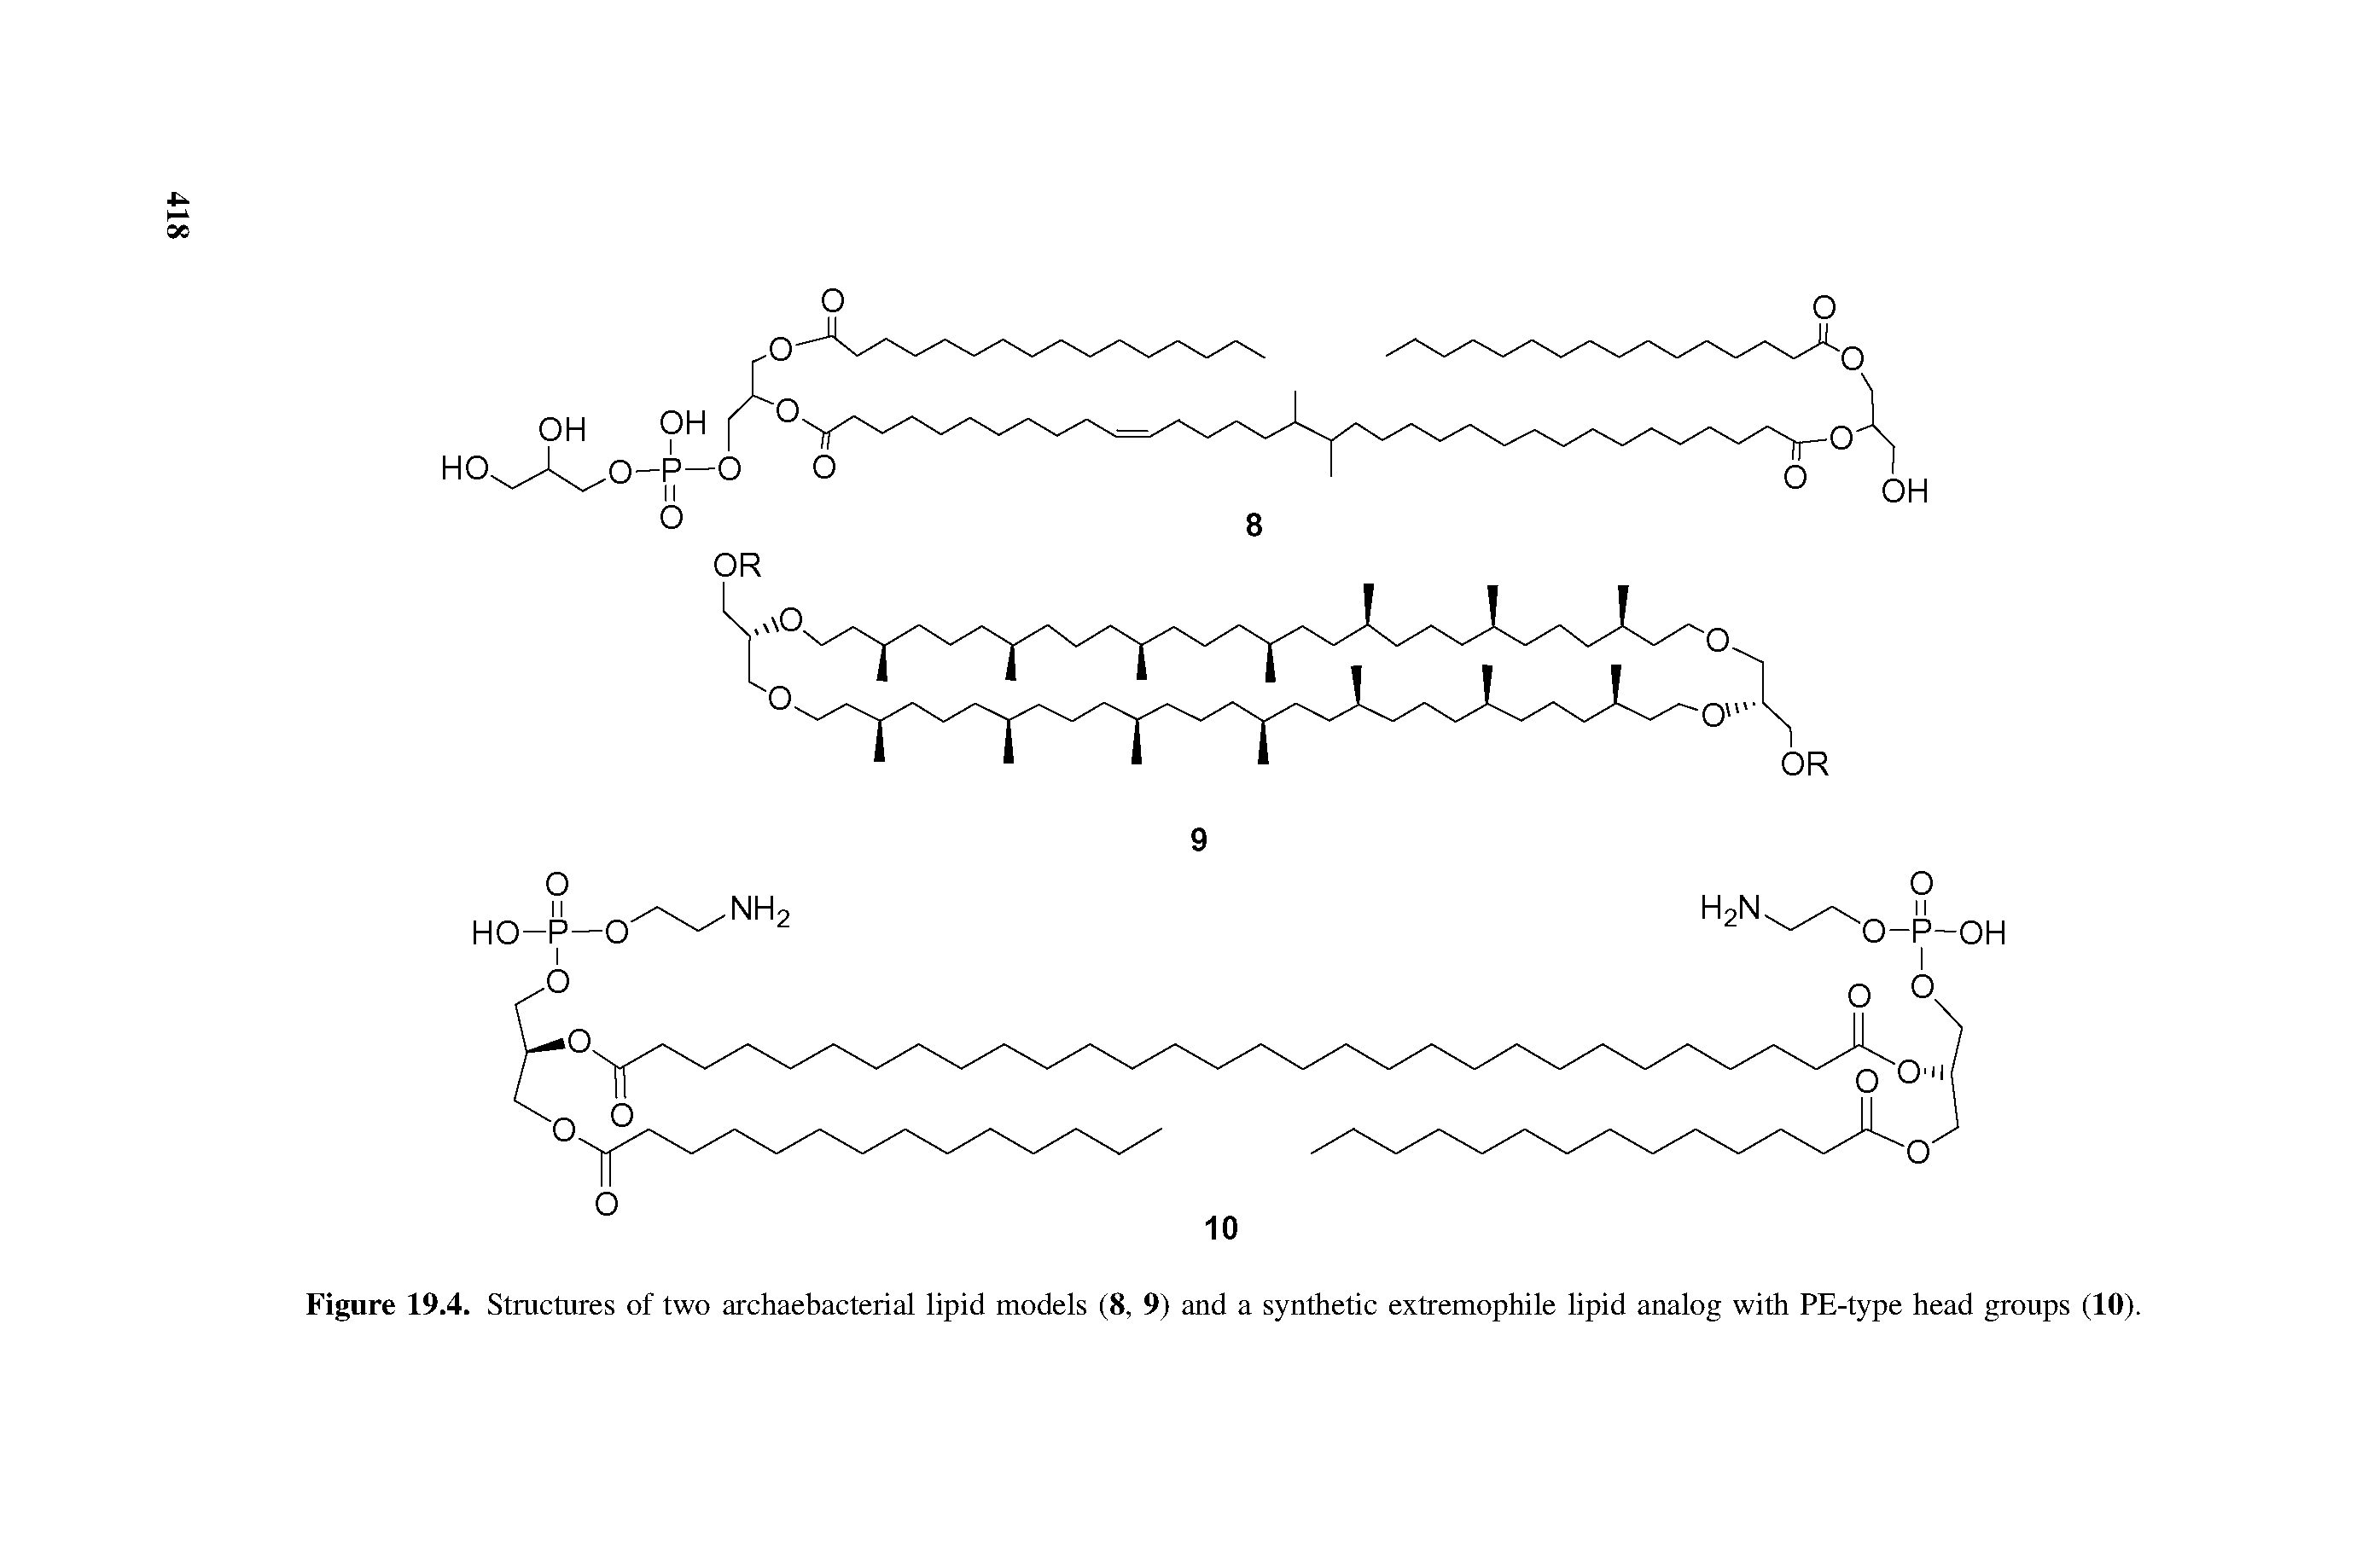 Figure 19.4. Structures of two archaebacterial lipid models (8, 9) and a synthetic extremophile lipid analog with PE-type head groups (10).